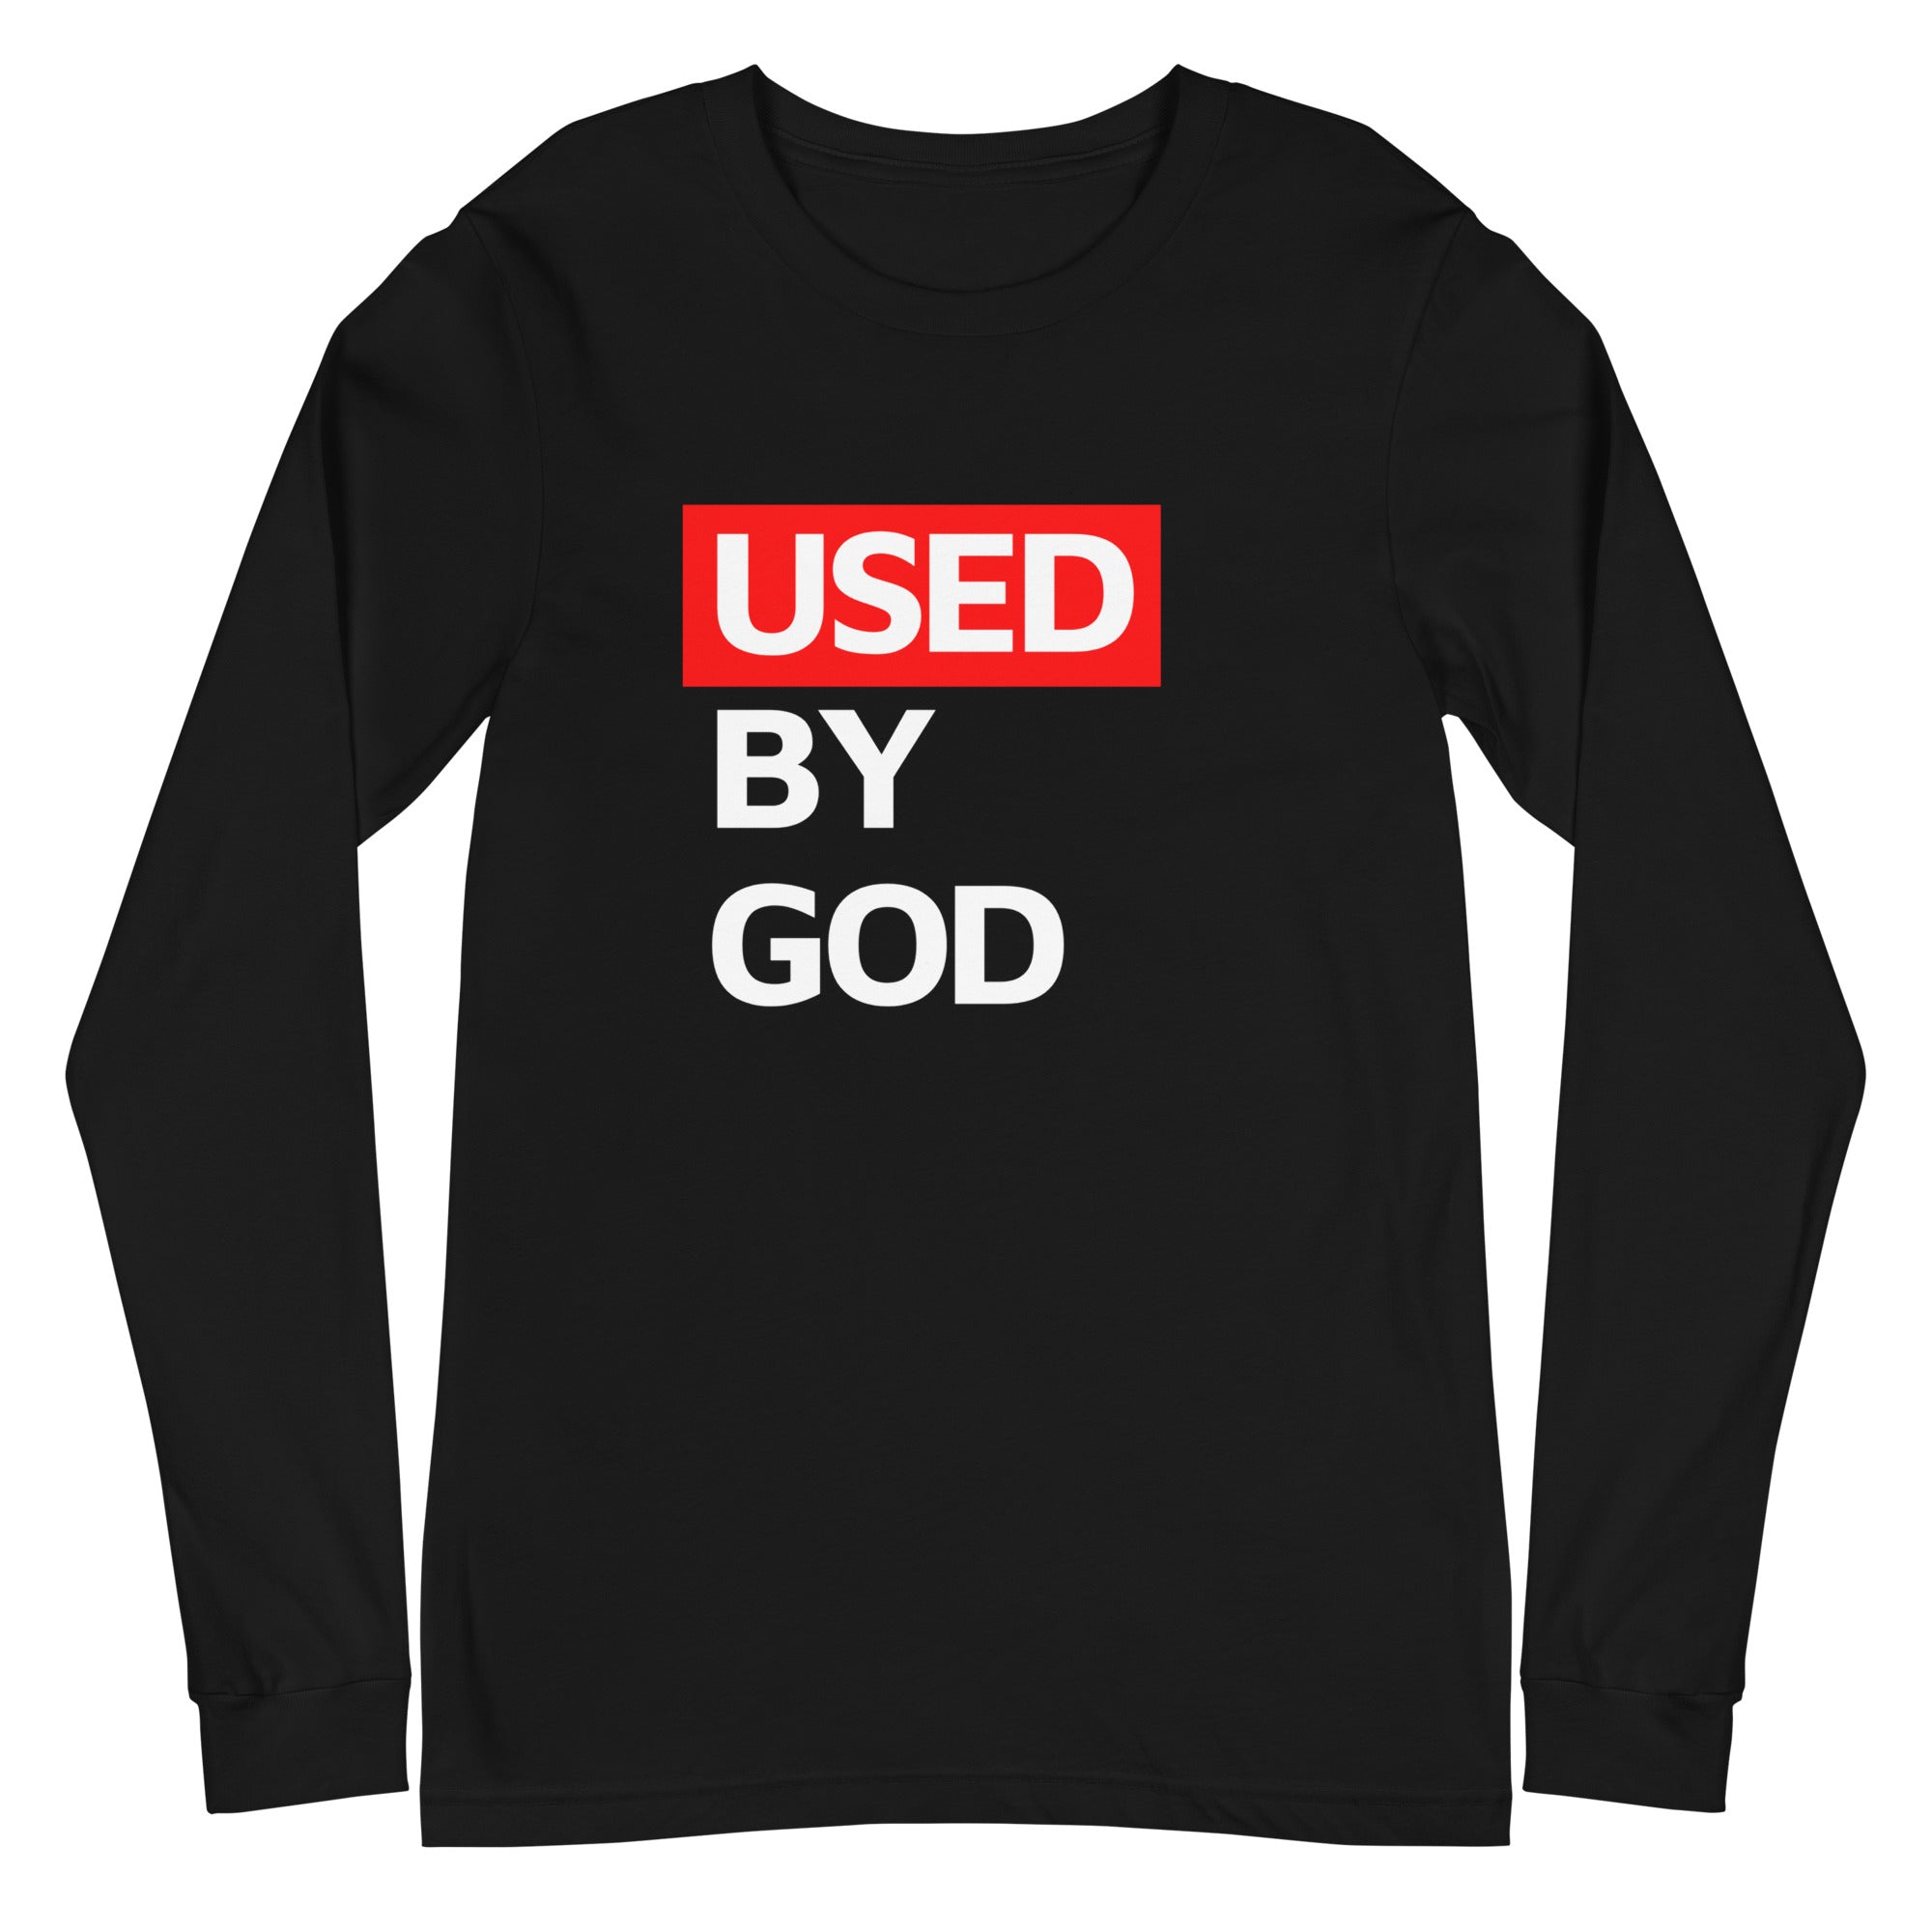 Be Bold, Used By God, Used By God Clothing, Christian Apparel, Christian T-Shirts, Christian Shirts, christian t shirts for women, Men's Christian T-Shirt, Christian Clothing, God Shirts, christian clothing t shirts, Christian Sweatshirts, womens christian t shirts,t-shirts about jesus, God Clothing, Jesus Hoodie, Jesus Clothes, God Is Dope, Art Of Homage, Red Letter Clothing, Elevated Faith, Beacon Threads, God The Father Apparel